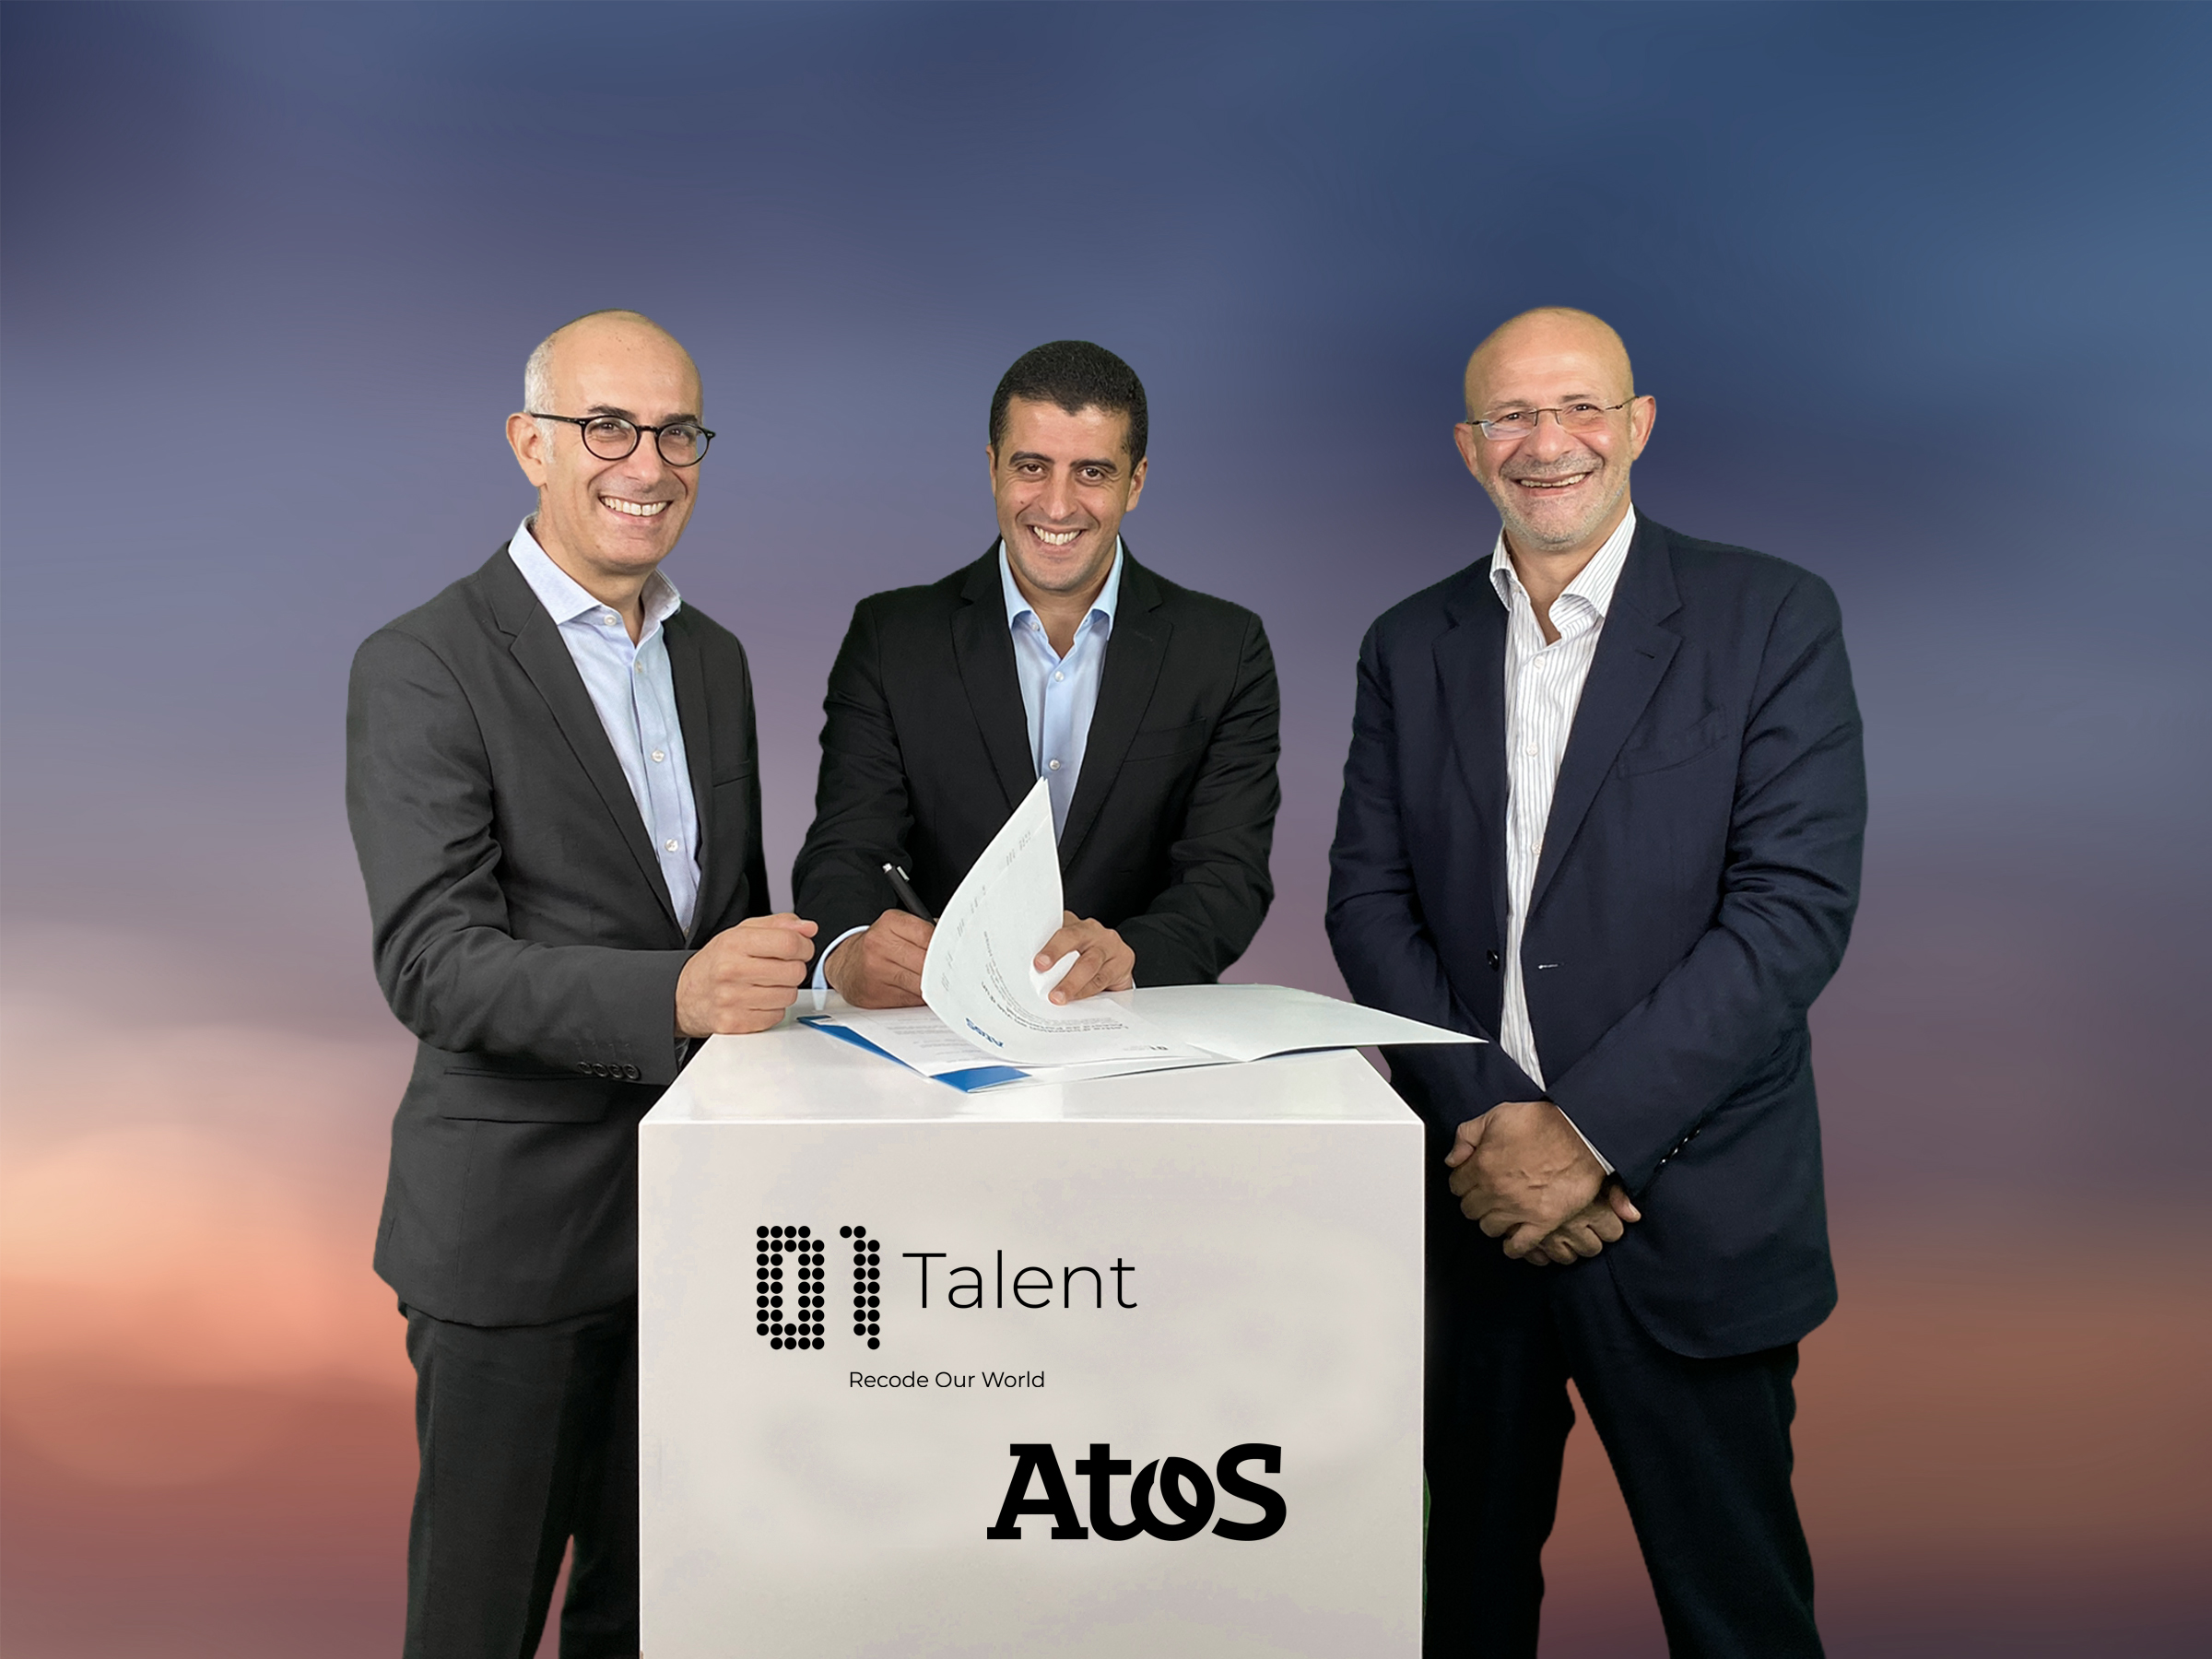 Atos becomes 01Talent’s technology partner in Africa to identify, train and connect the digital talent of tomorrow to jobs